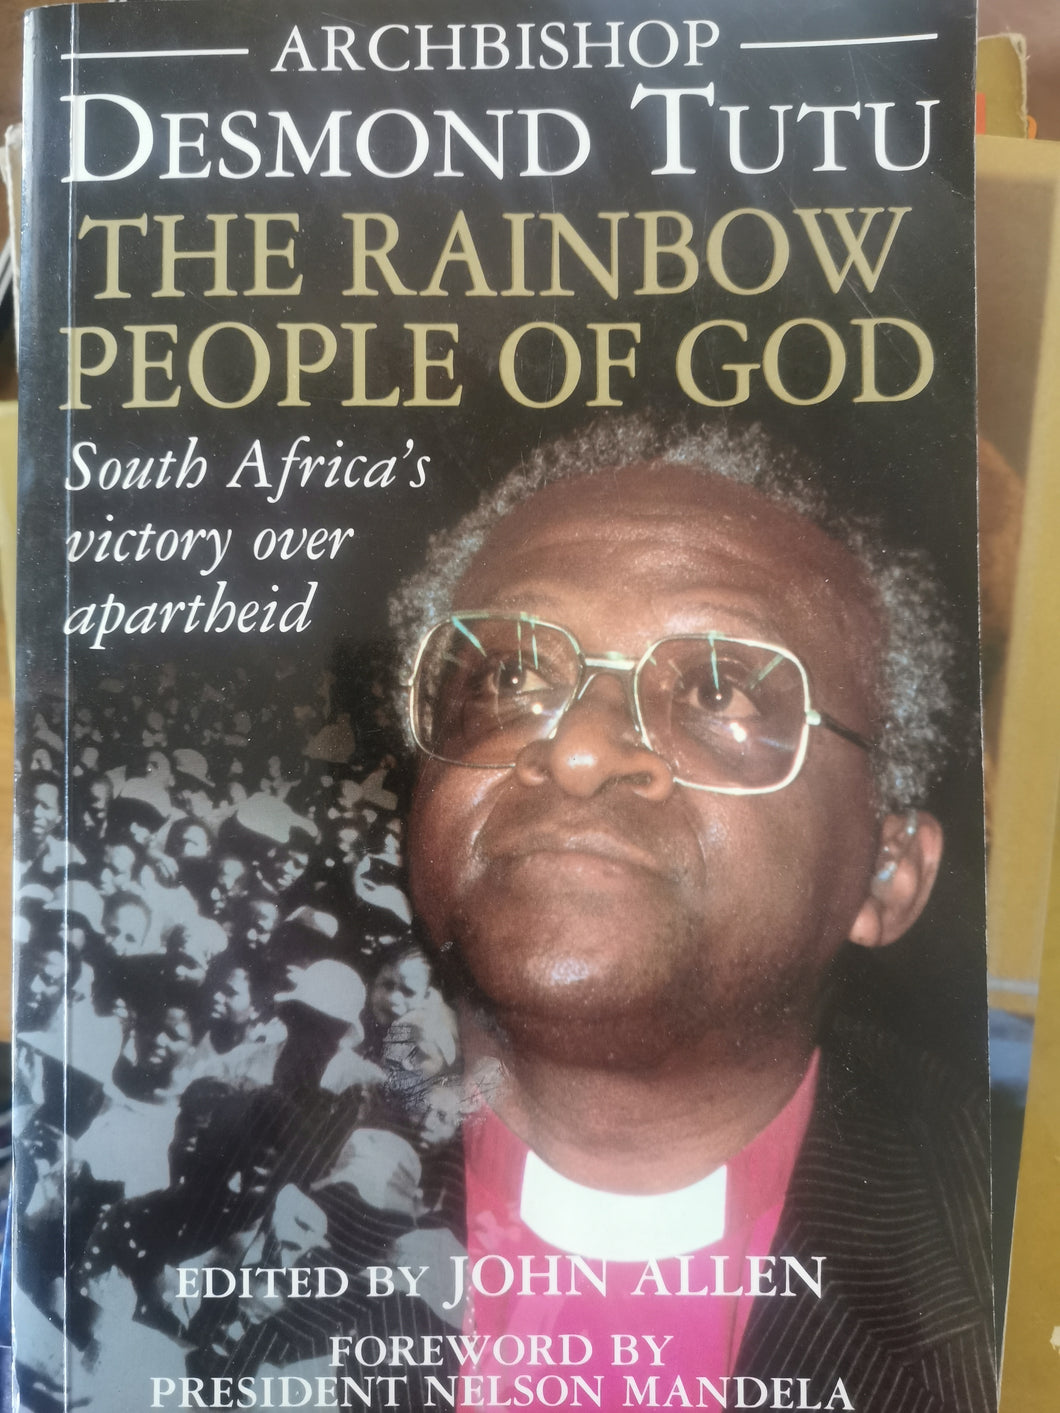 The Rainbow People of God: South Africa's Victory over Apartheid - Archbishop Desmond Tutu